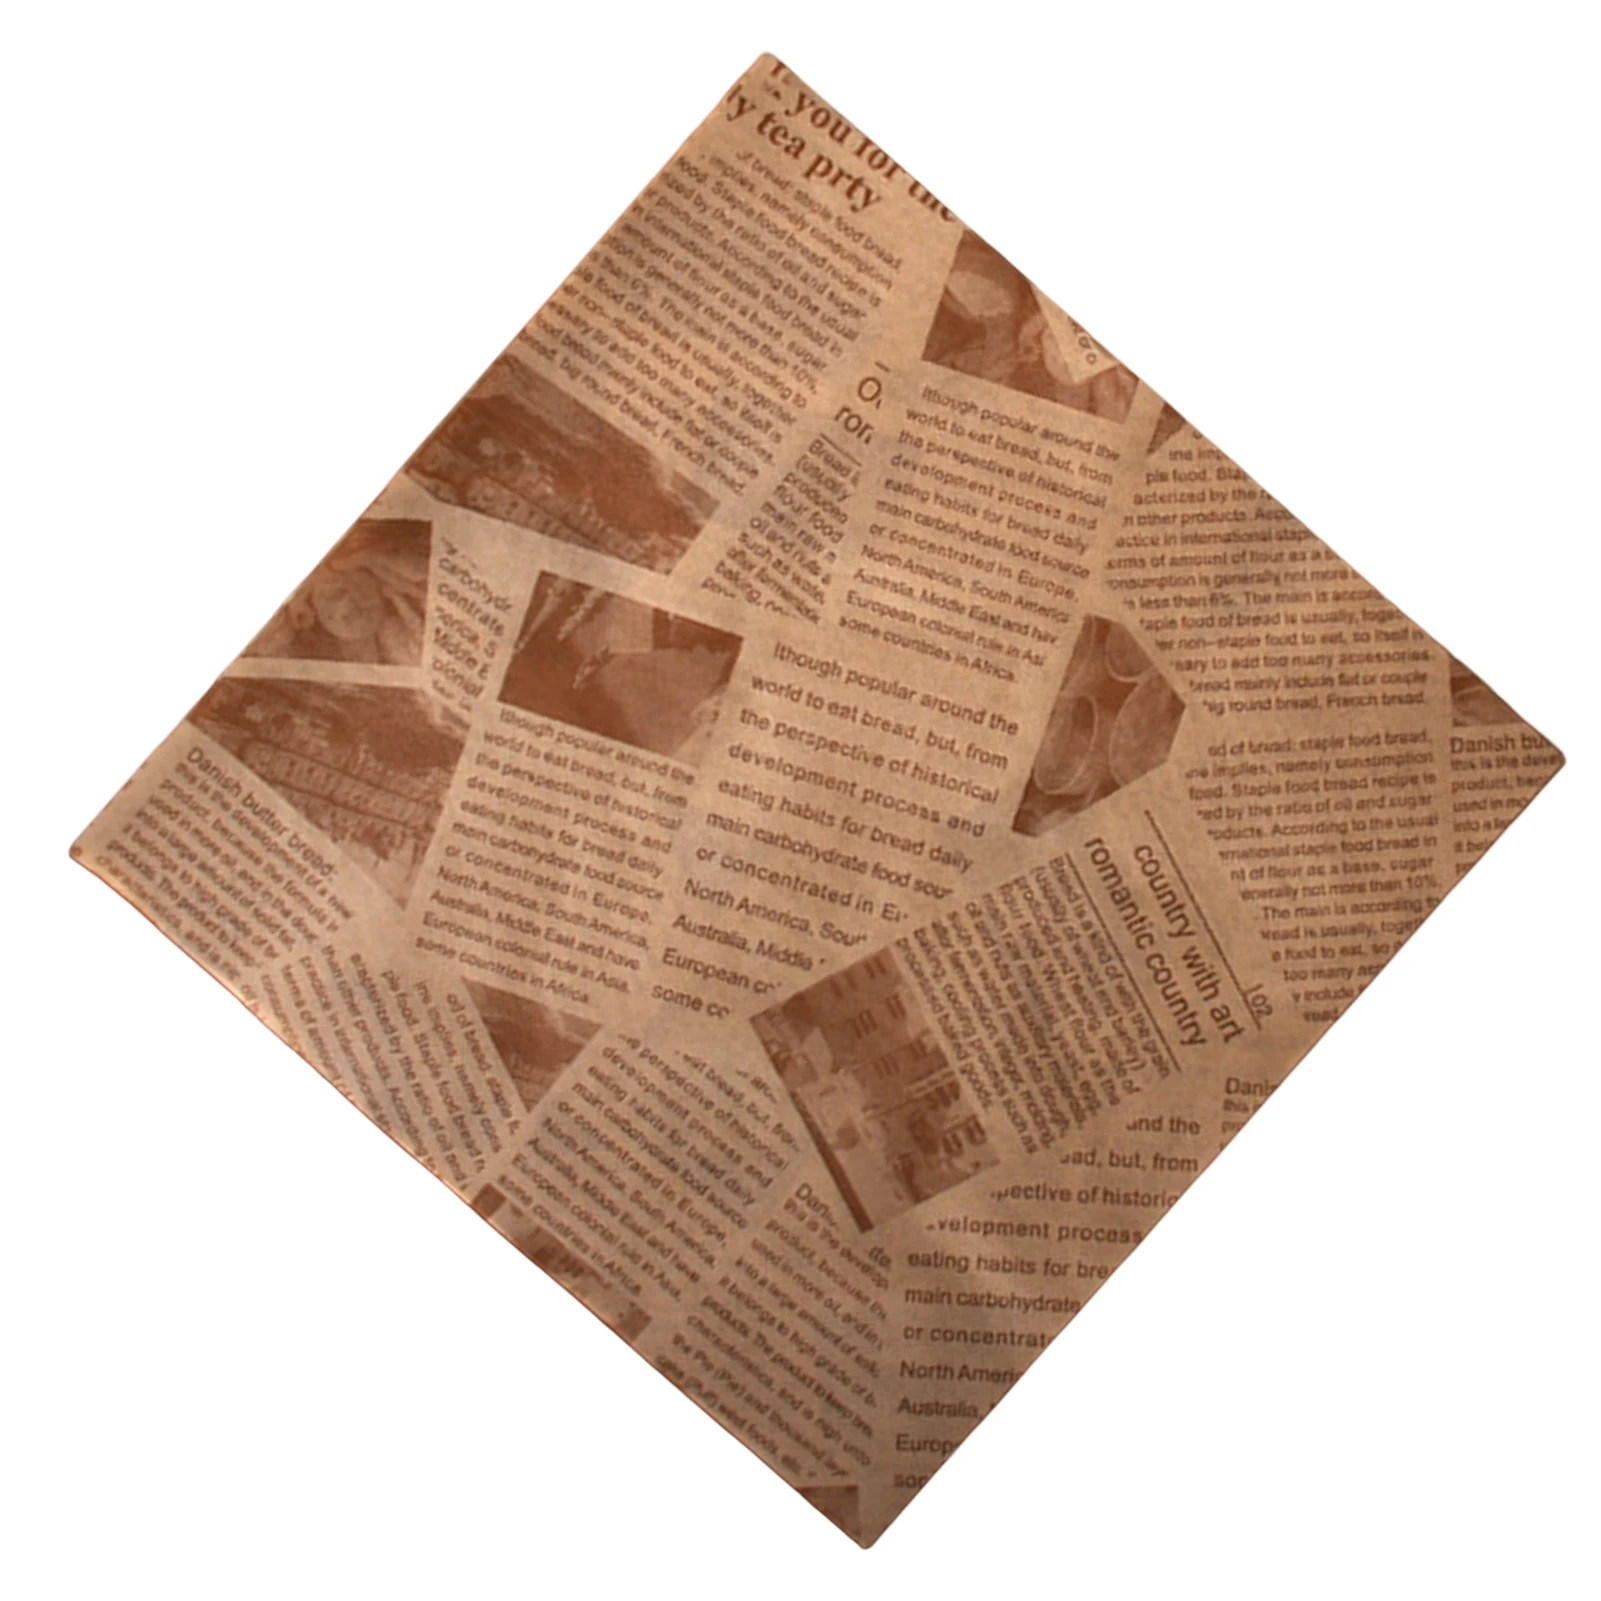 

100 Sheets Paper Sandwich Paper Liners English Newspapers Print Food Basket Liners for Wrapping Bread and Sandwiches